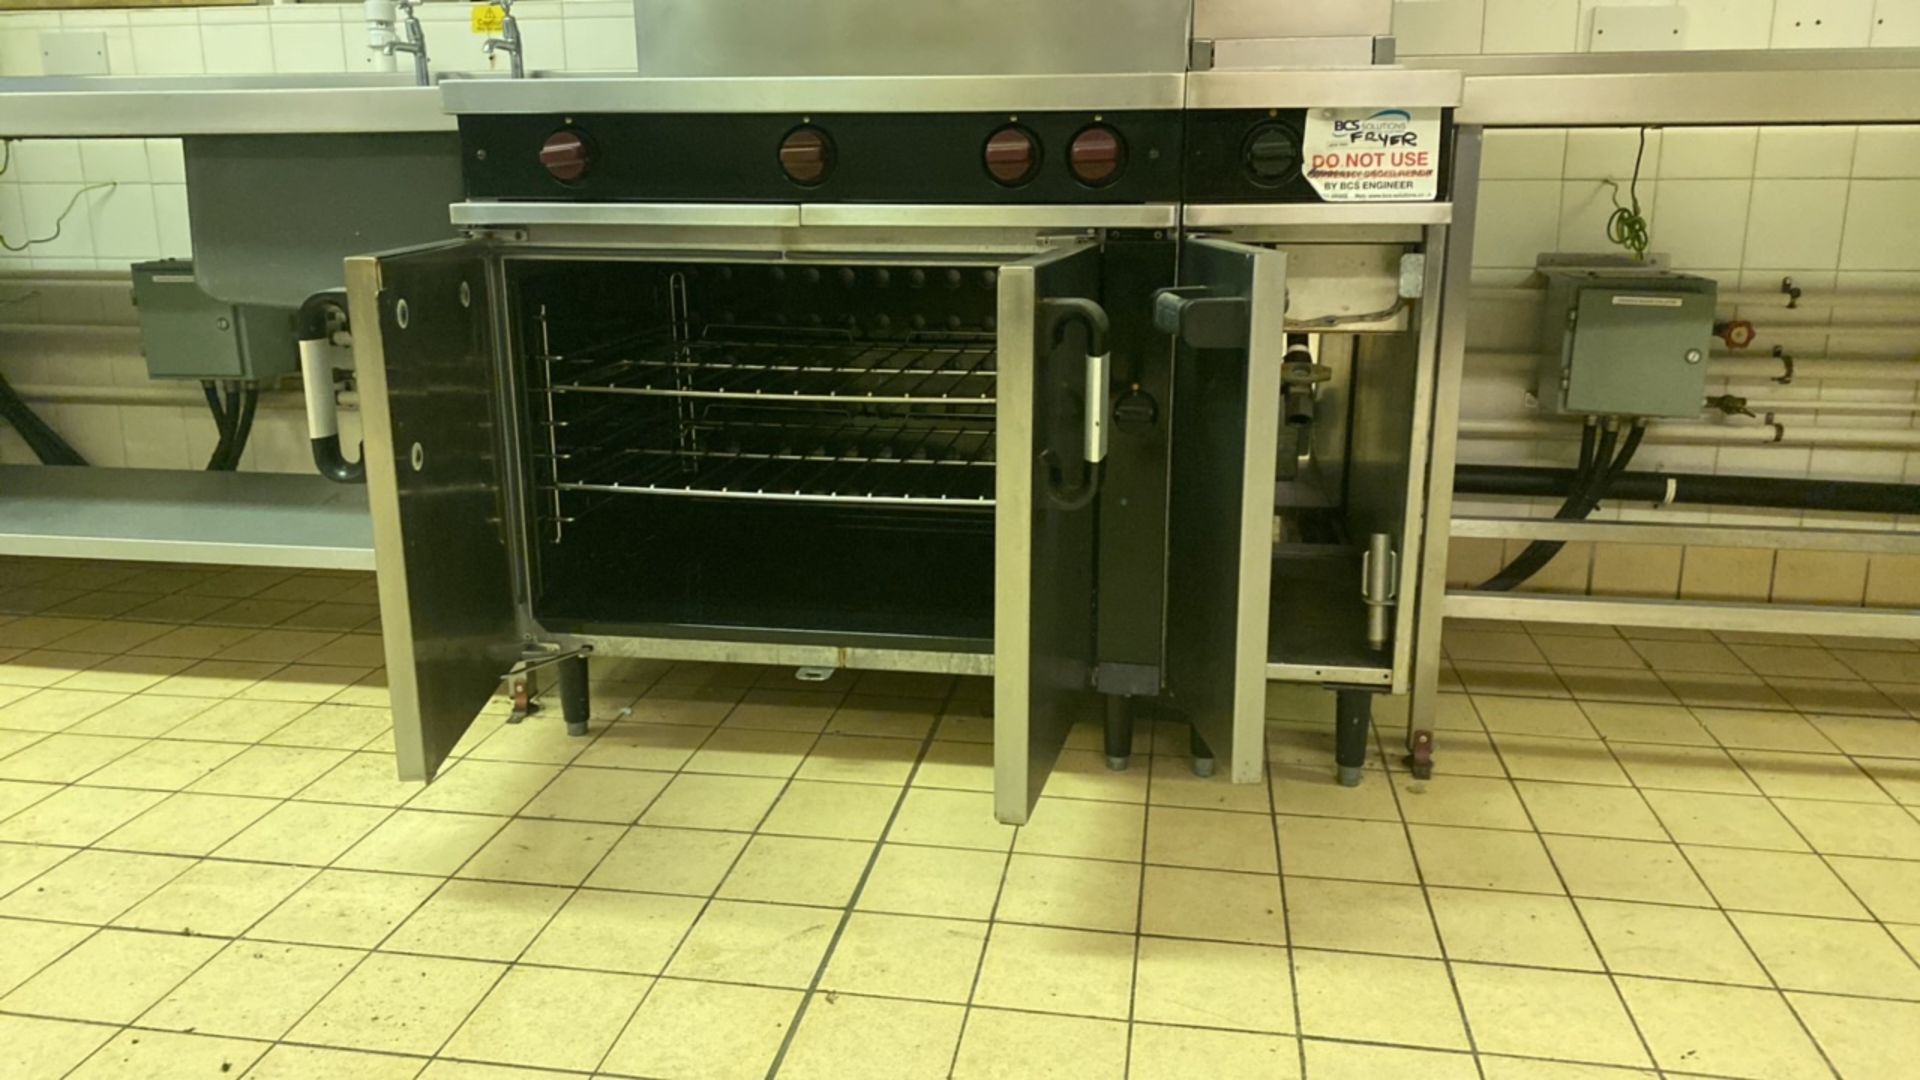 Morewood M Line Plus Solid Top Oven with Fryer - Image 4 of 6